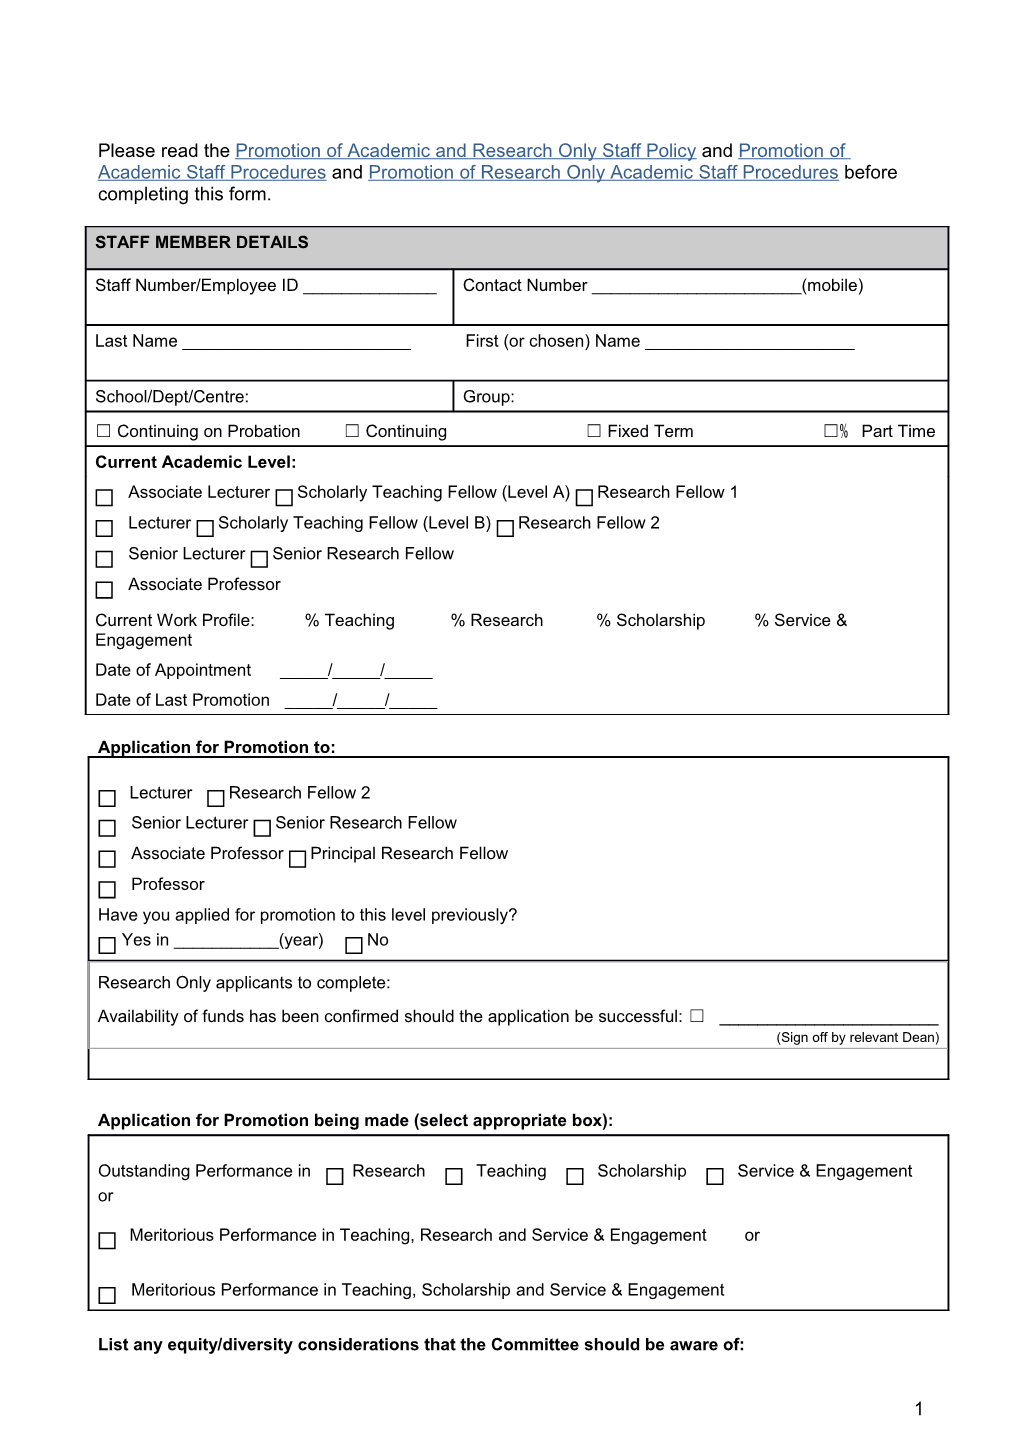 Application and Case for Promotion Form